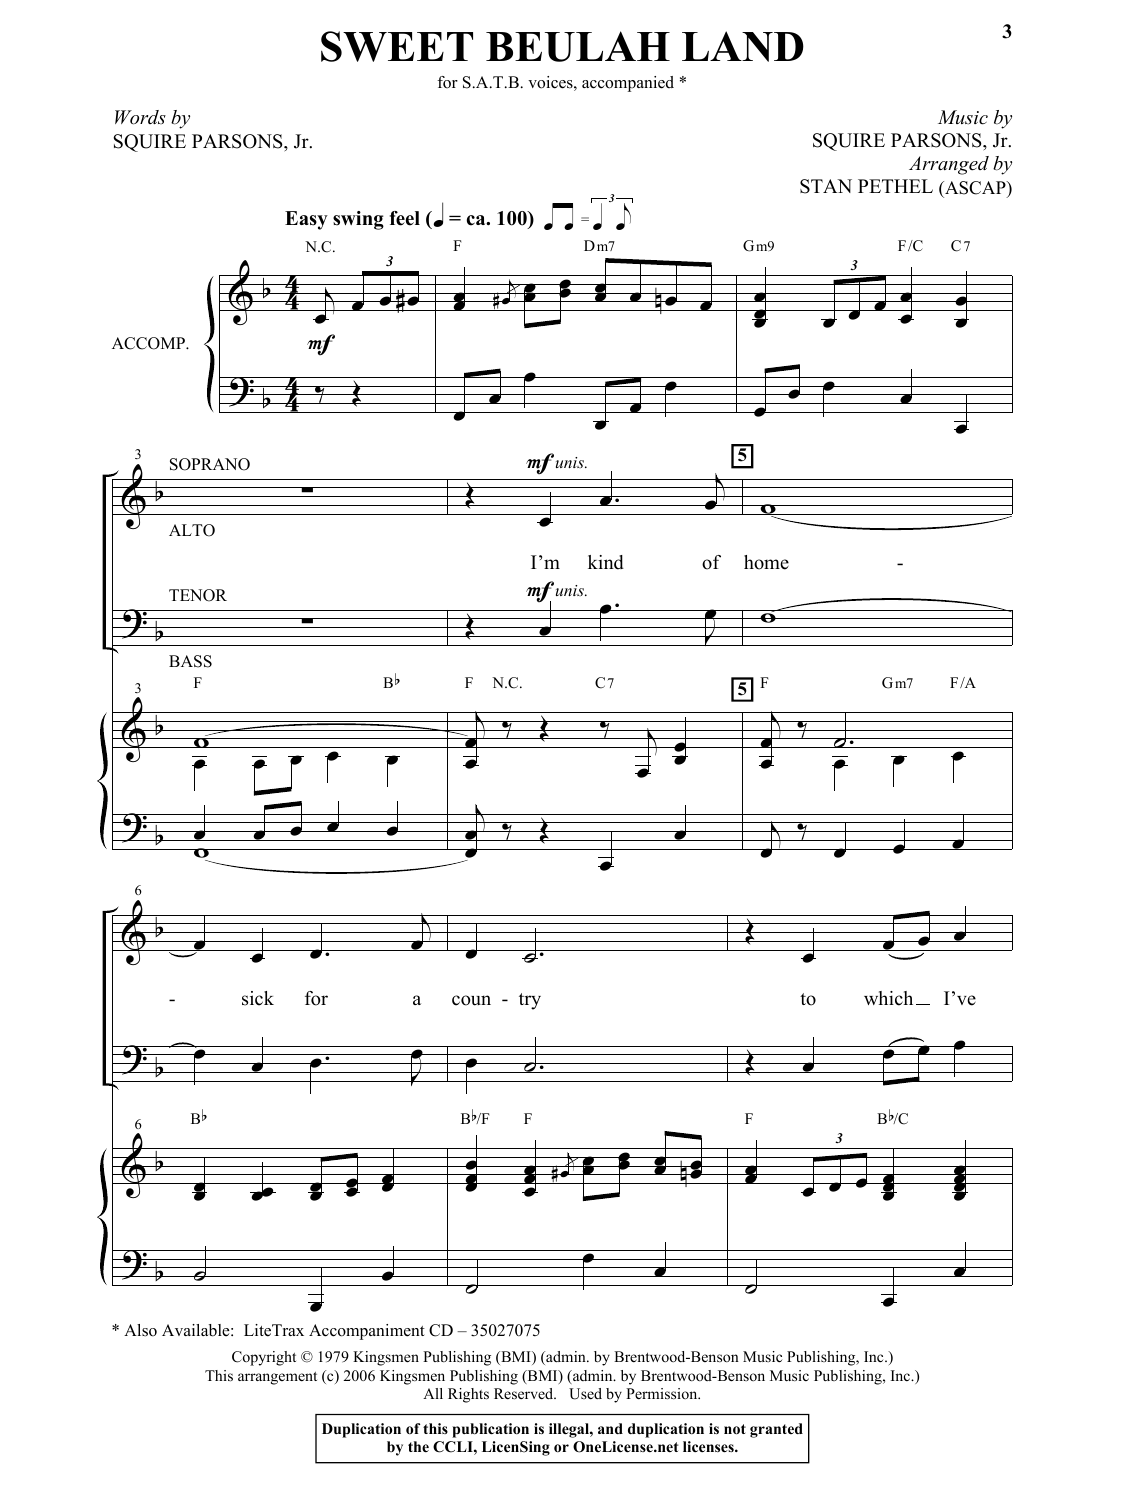 Download Squire Parsons Sweet Beulah Land (arr. Stan Pethel) Sheet Music